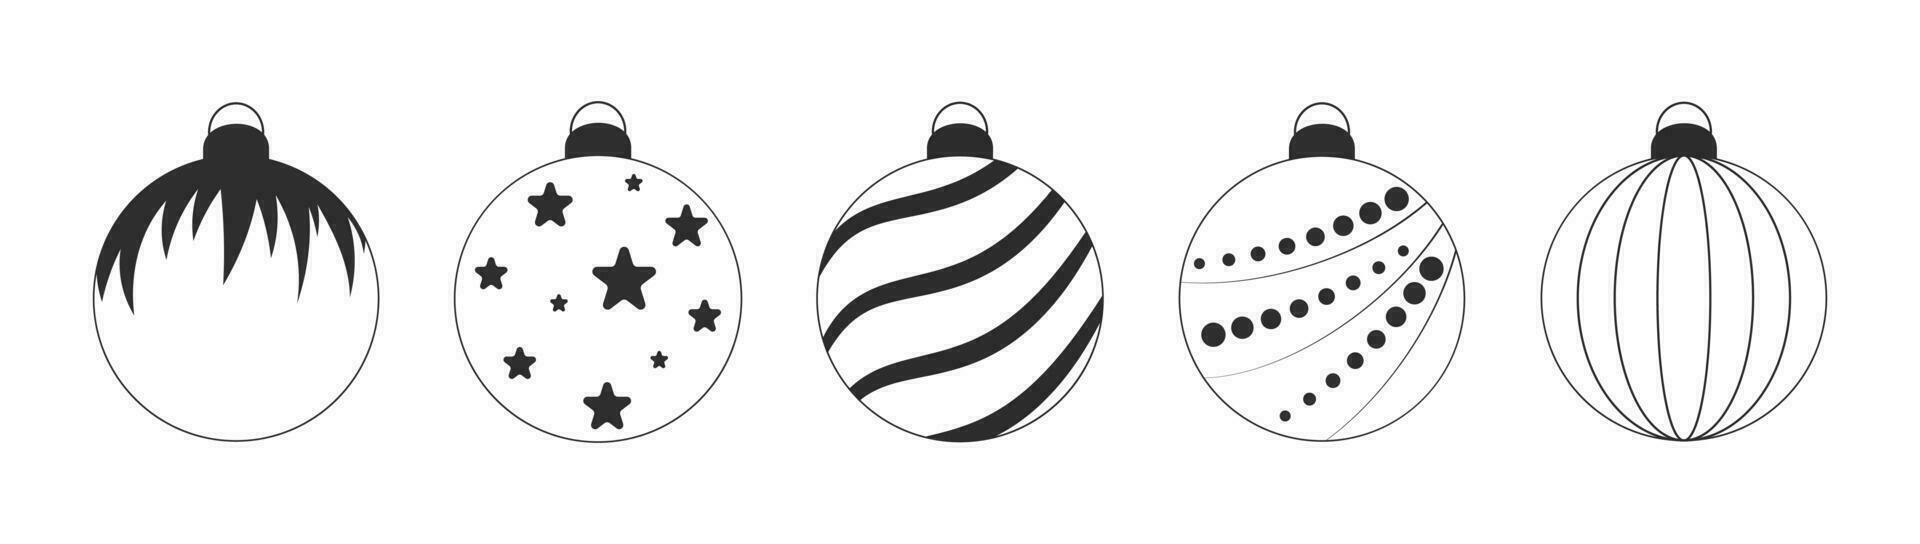 Black and white Christmas balls. Coloring page for kids. Decorative elements for greeting card, poster, banner, advertising, scrapbooking. Vector illustration.